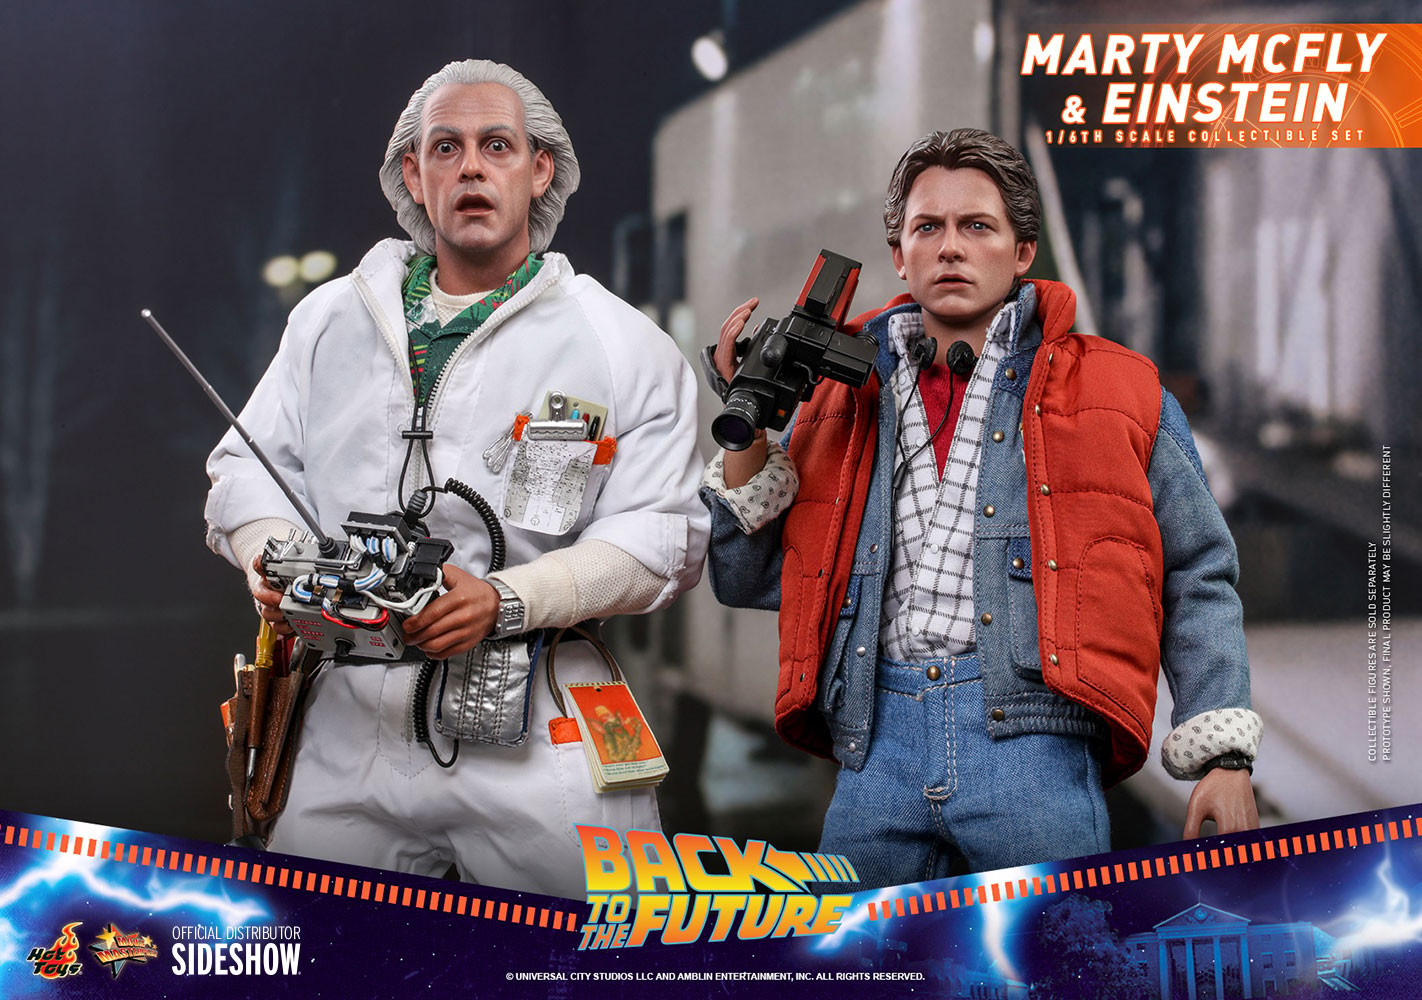 Marty McFly and Einstein Exclusive Edition (Prototype Shown) View 16